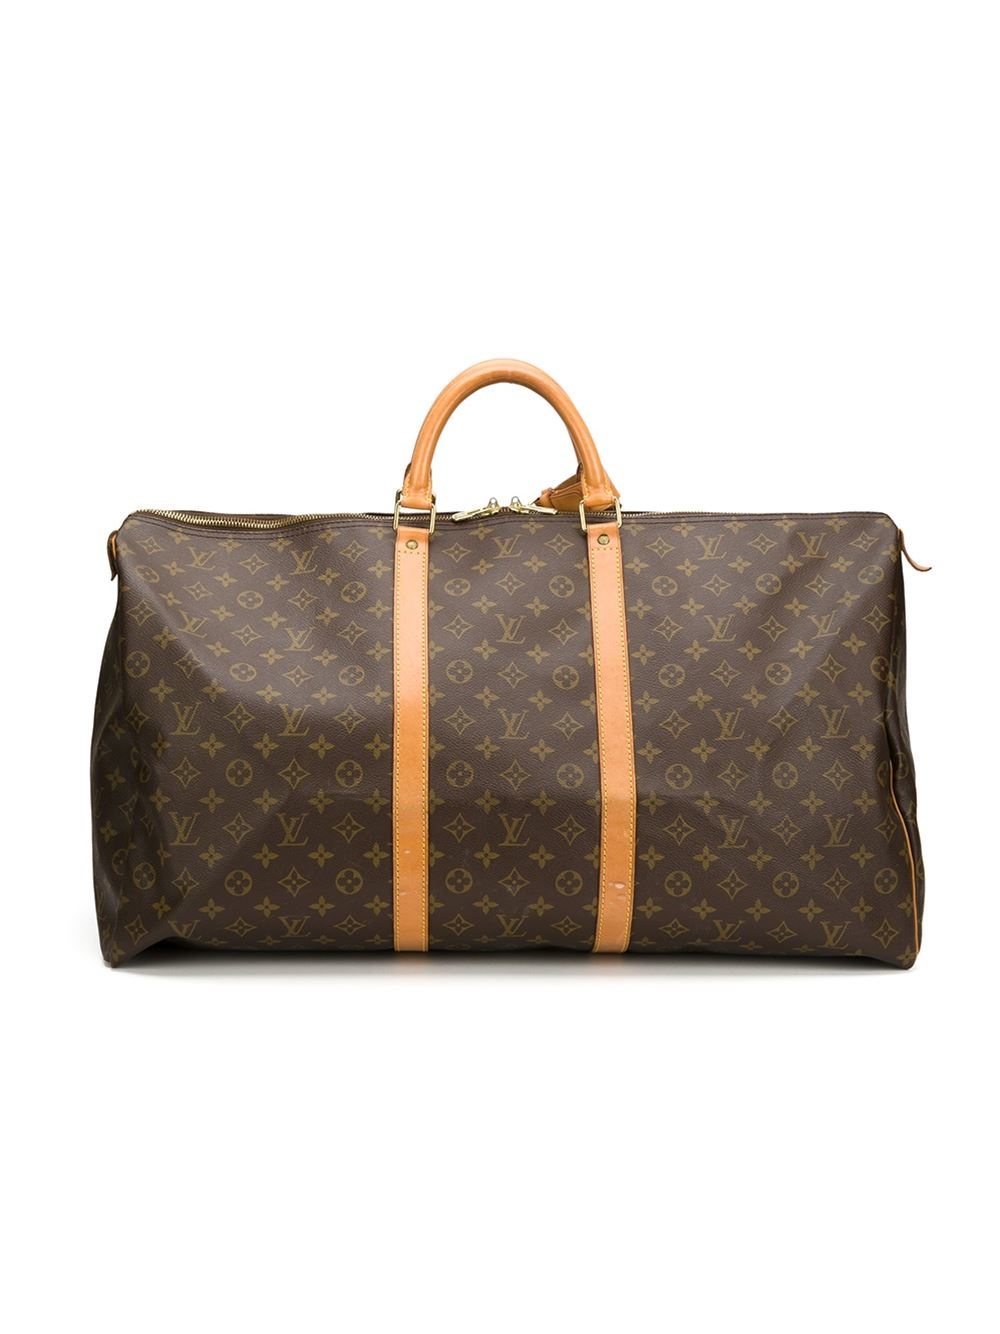 Lyst - Louis Vuitton Large Monogram Holdall in Brown